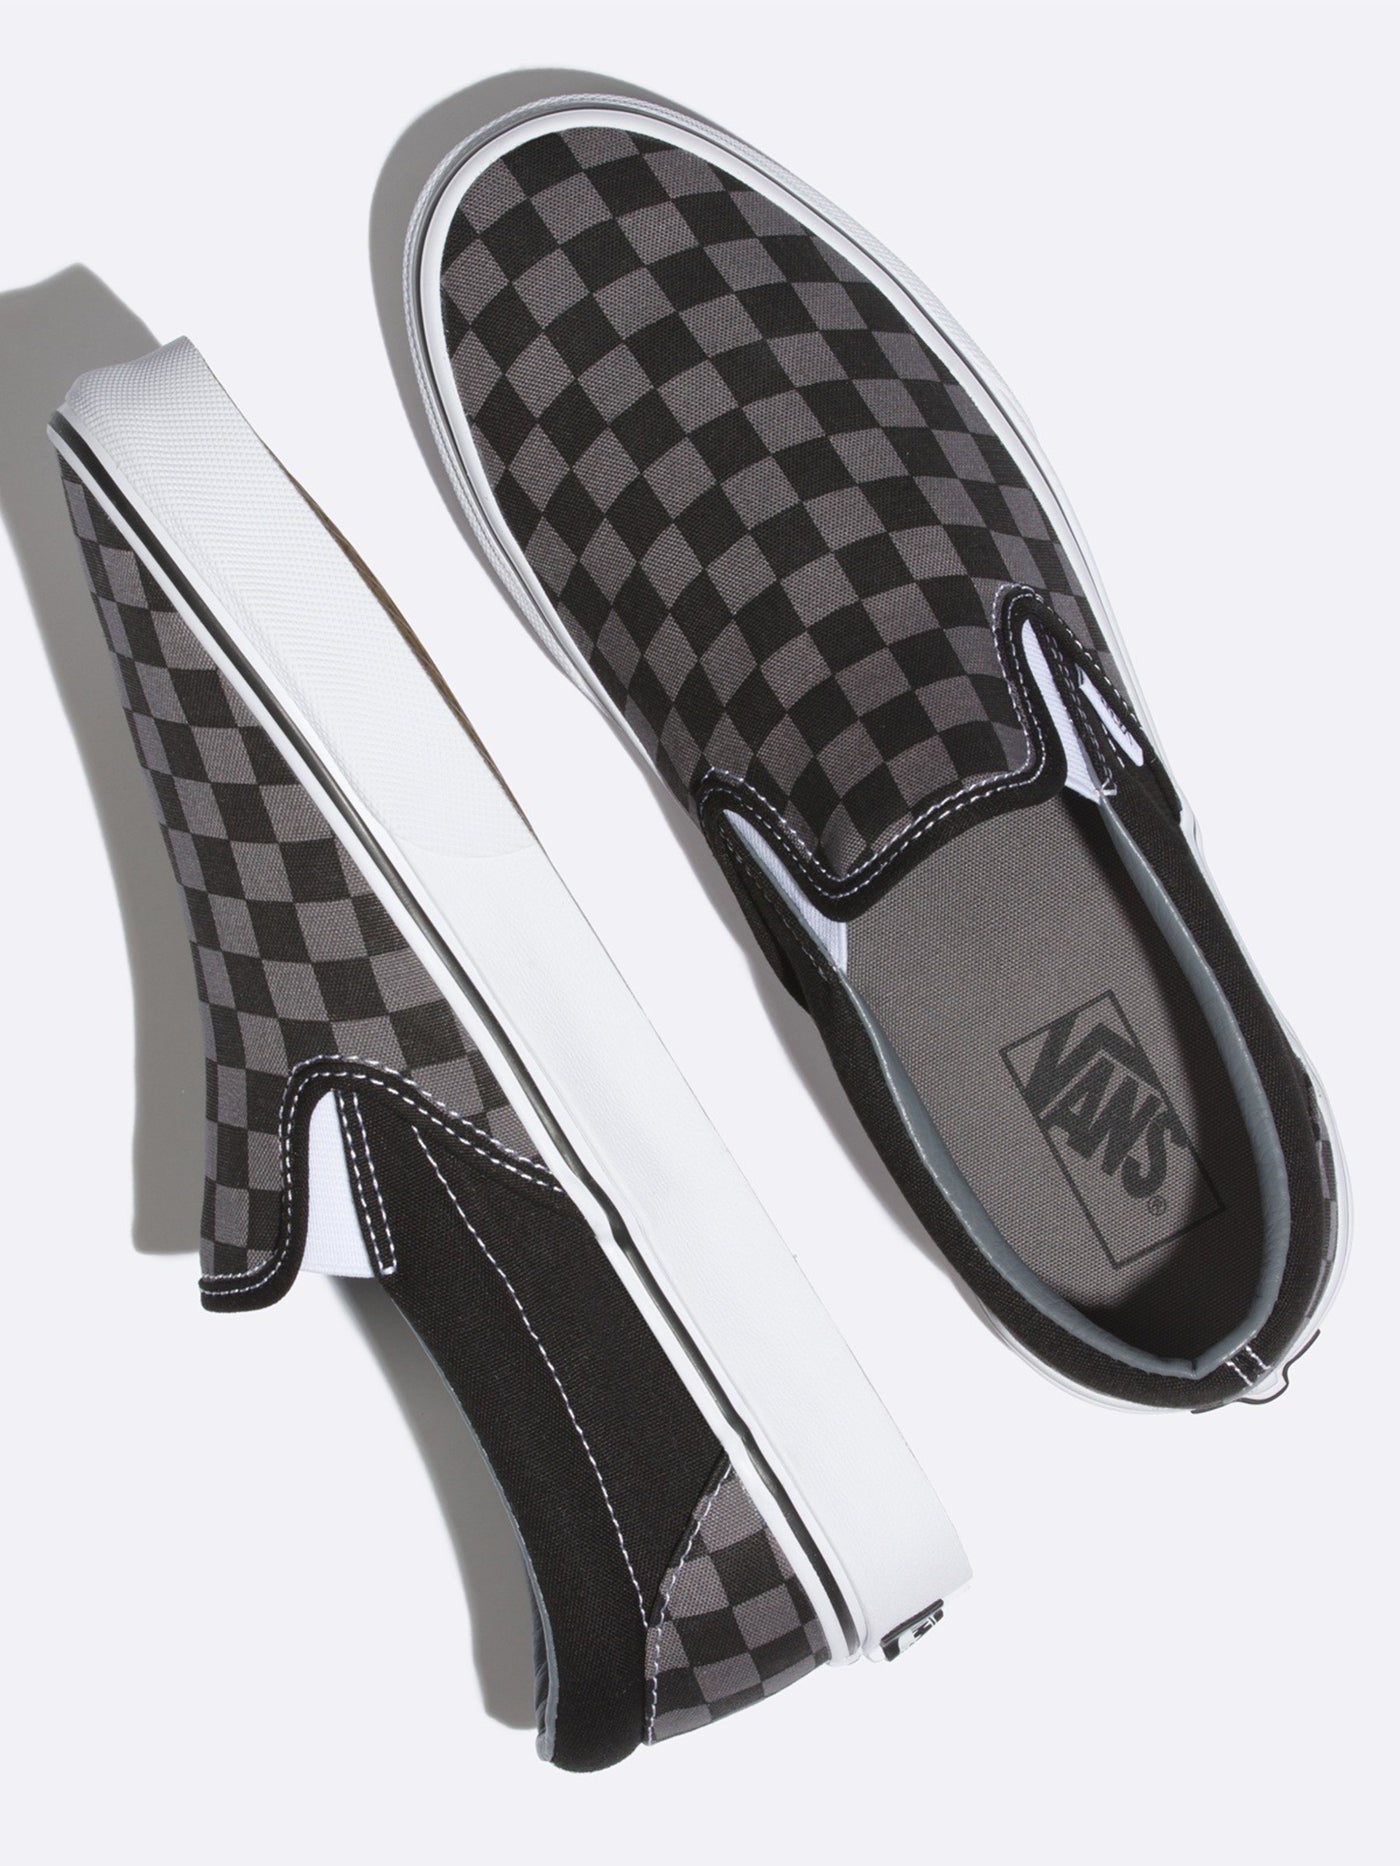 Vans Classic Slip-On Black/Pewter Check Shoes